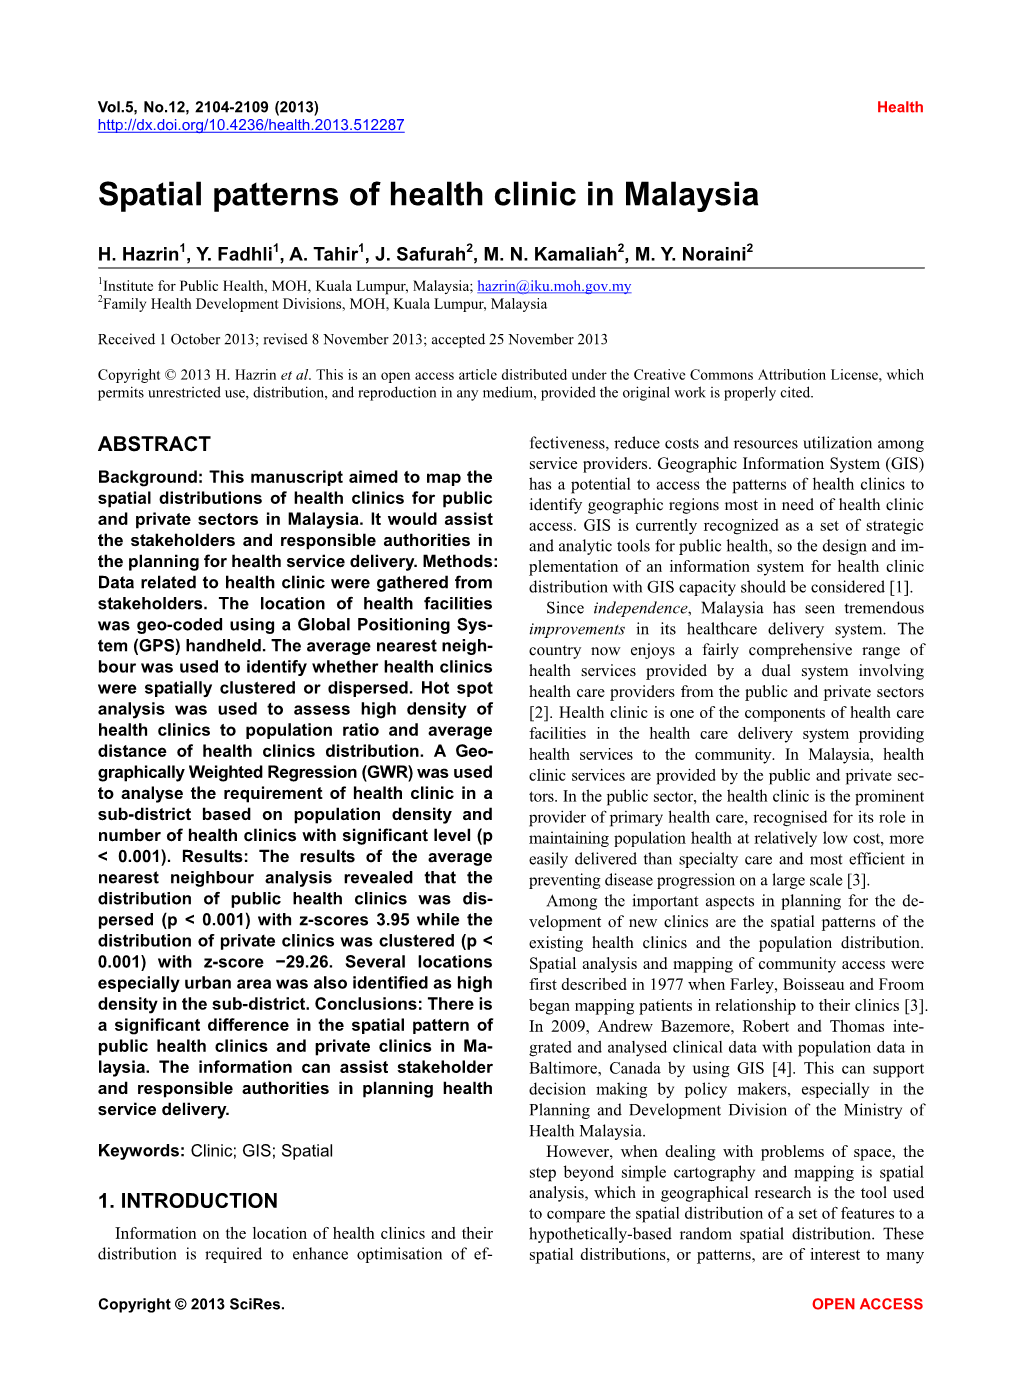 Spatial Patterns of Health Clinic in Malaysia